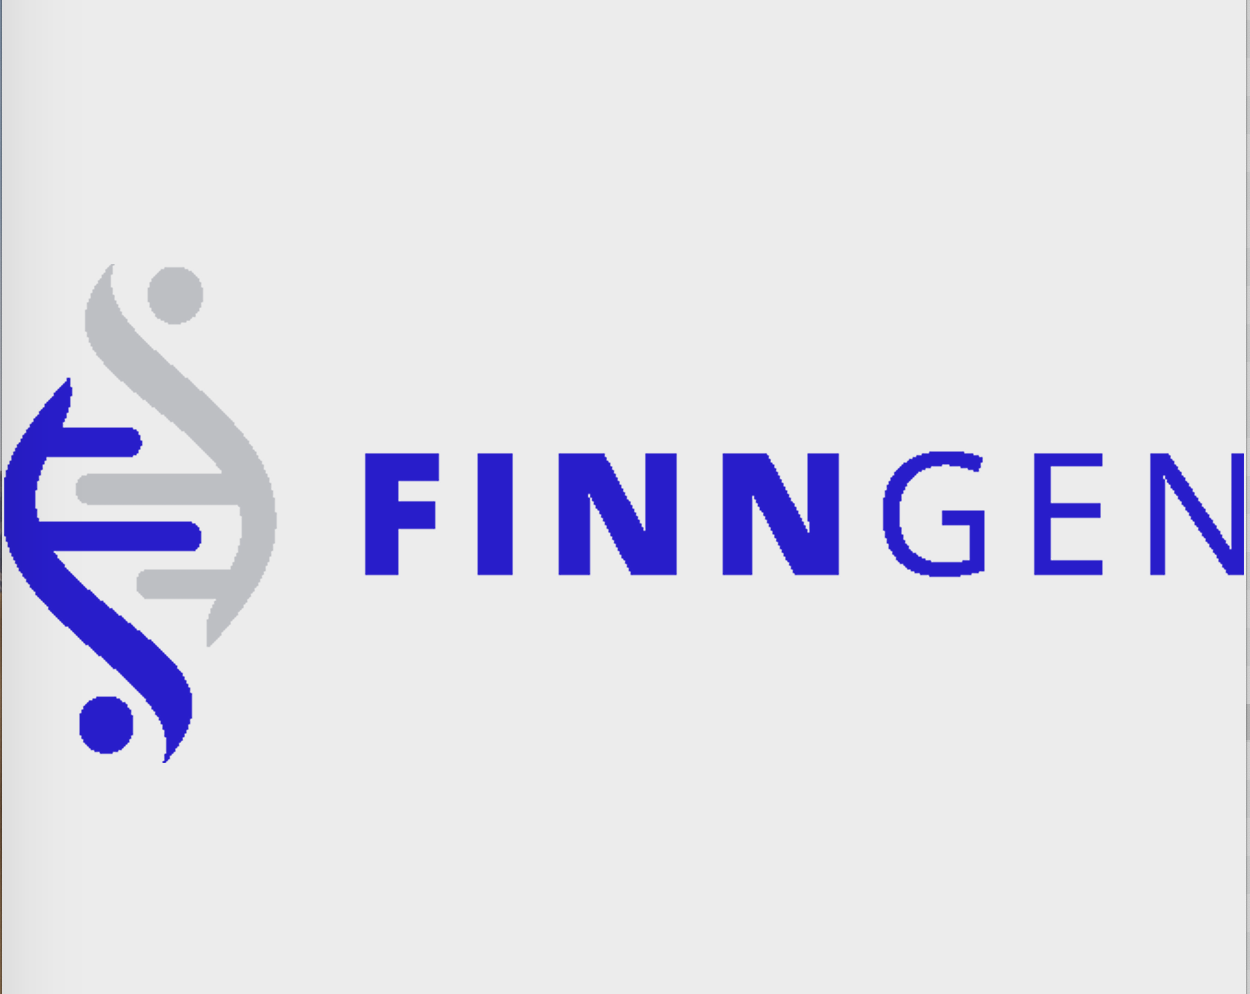 the purple and gray logo of FinnGen